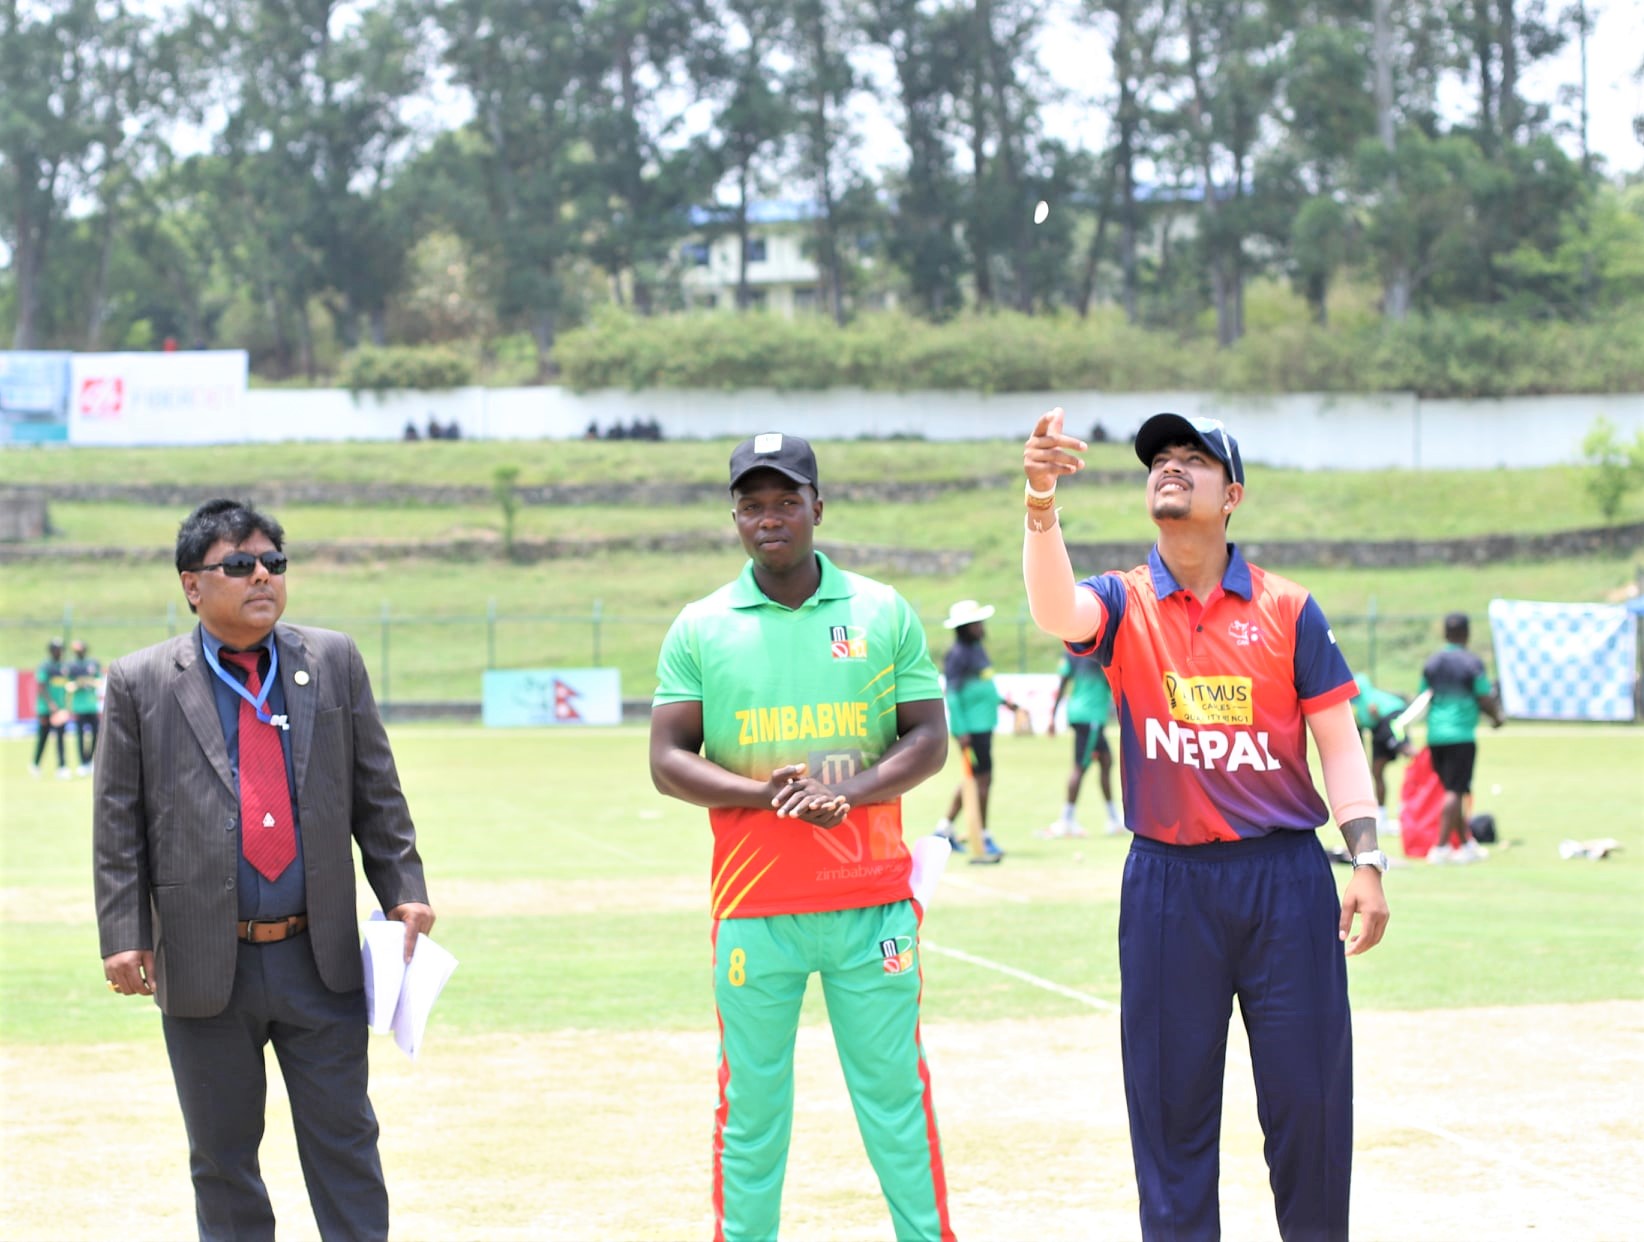 Nepal wins toss and elects to field against Zimbabwe